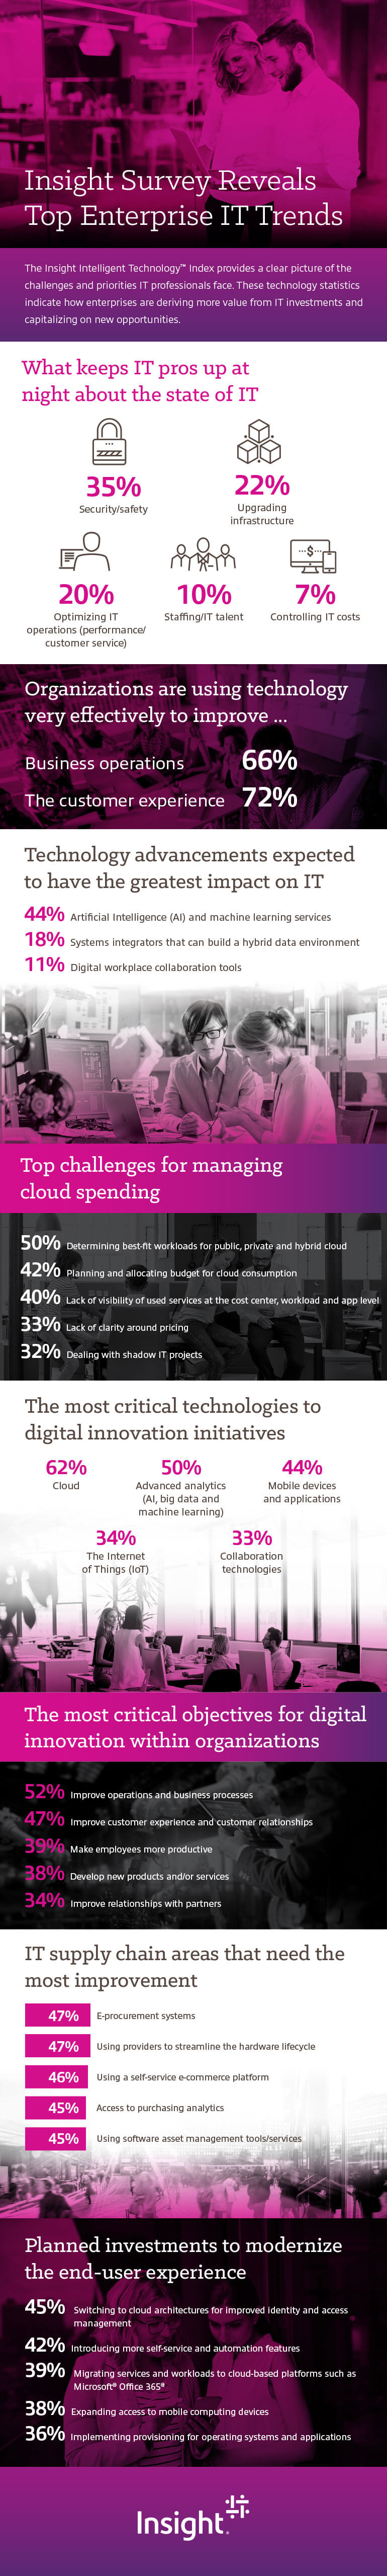 Infographic displaying Insight Survey Reveals Top Enterprise IT Trends. Translated below.